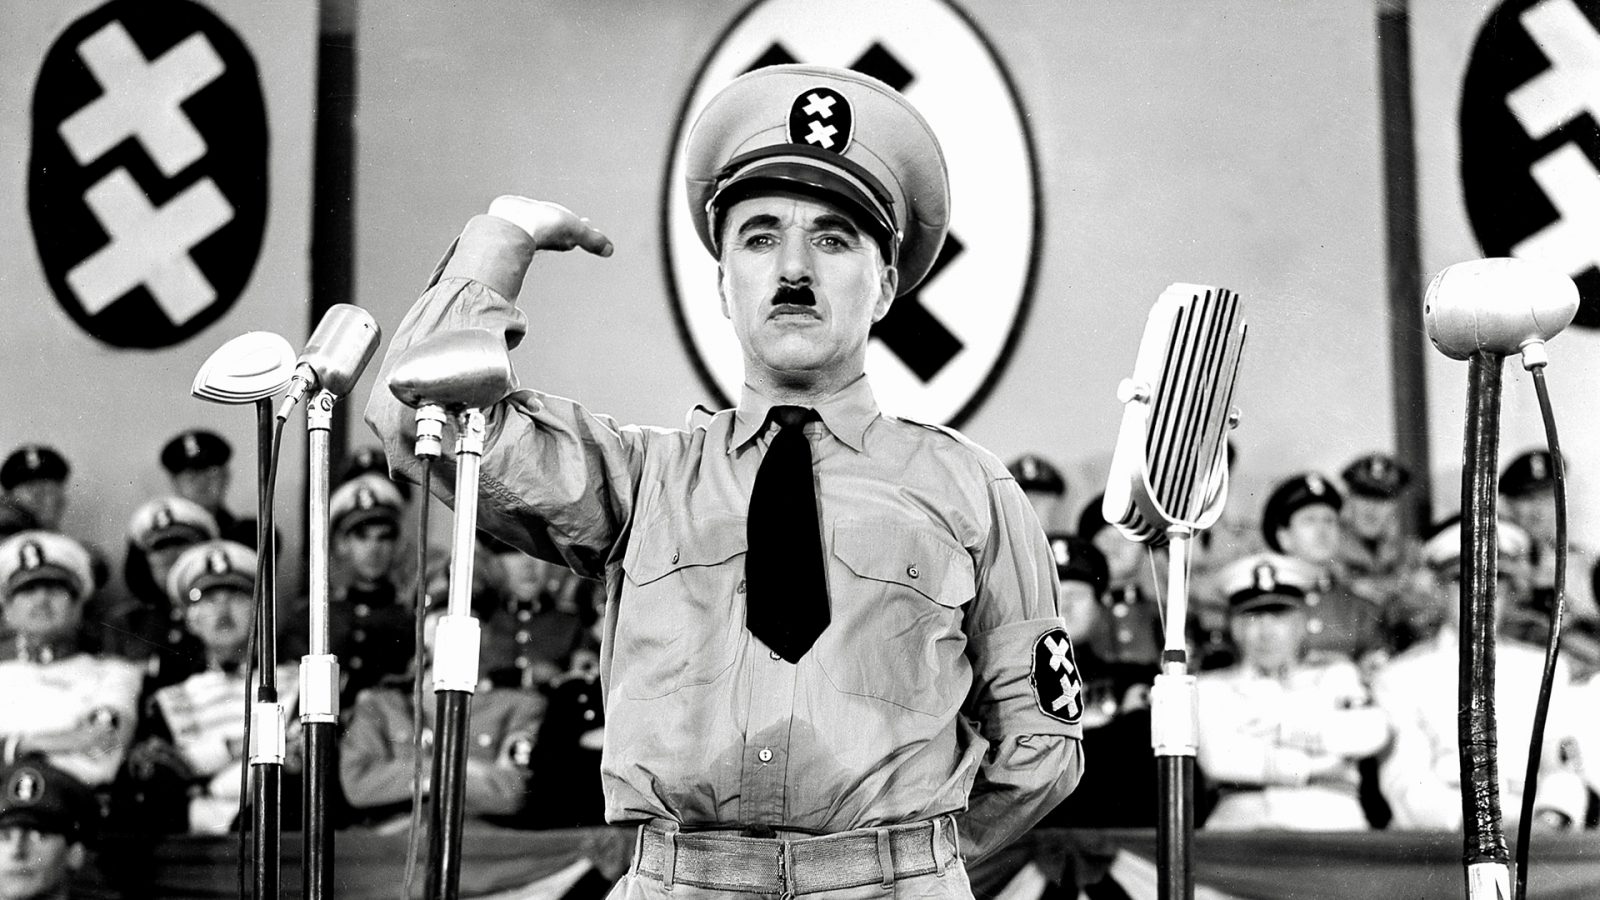 80% Of People Can’t Get 12/18 on This General Knowledge Quiz (feat. Charlie Chaplin) — Can You? The Great Dictator